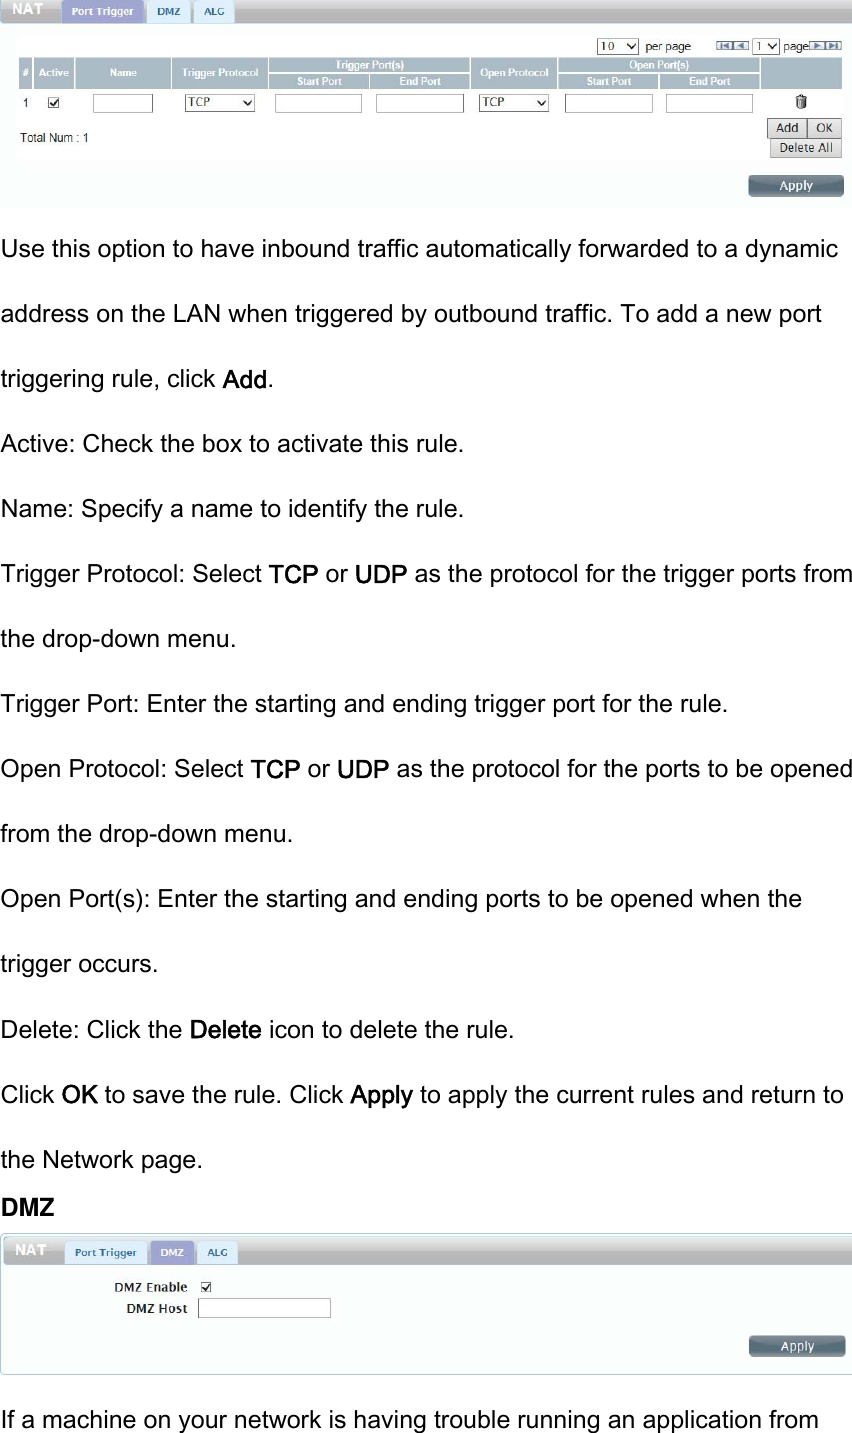  Use this option to have inbound traffic automatically forwarded to a dynamic address on the LAN when triggered by outbound traffic. To add a new port triggering rule, click Add. Active: Check the box to activate this rule. Name: Specify a name to identify the rule. Trigger Protocol: Select TCP or UDP as the protocol for the trigger ports from the drop-down menu. Trigger Port: Enter the starting and ending trigger port for the rule. Open Protocol: Select TCP or UDP as the protocol for the ports to be opened from the drop-down menu. Open Port(s): Enter the starting and ending ports to be opened when the trigger occurs. Delete: Click the Delete icon to delete the rule. Click OK to save the rule. Click Apply to apply the current rules and return to the Network page. DMZ  If a machine on your network is having trouble running an application from 